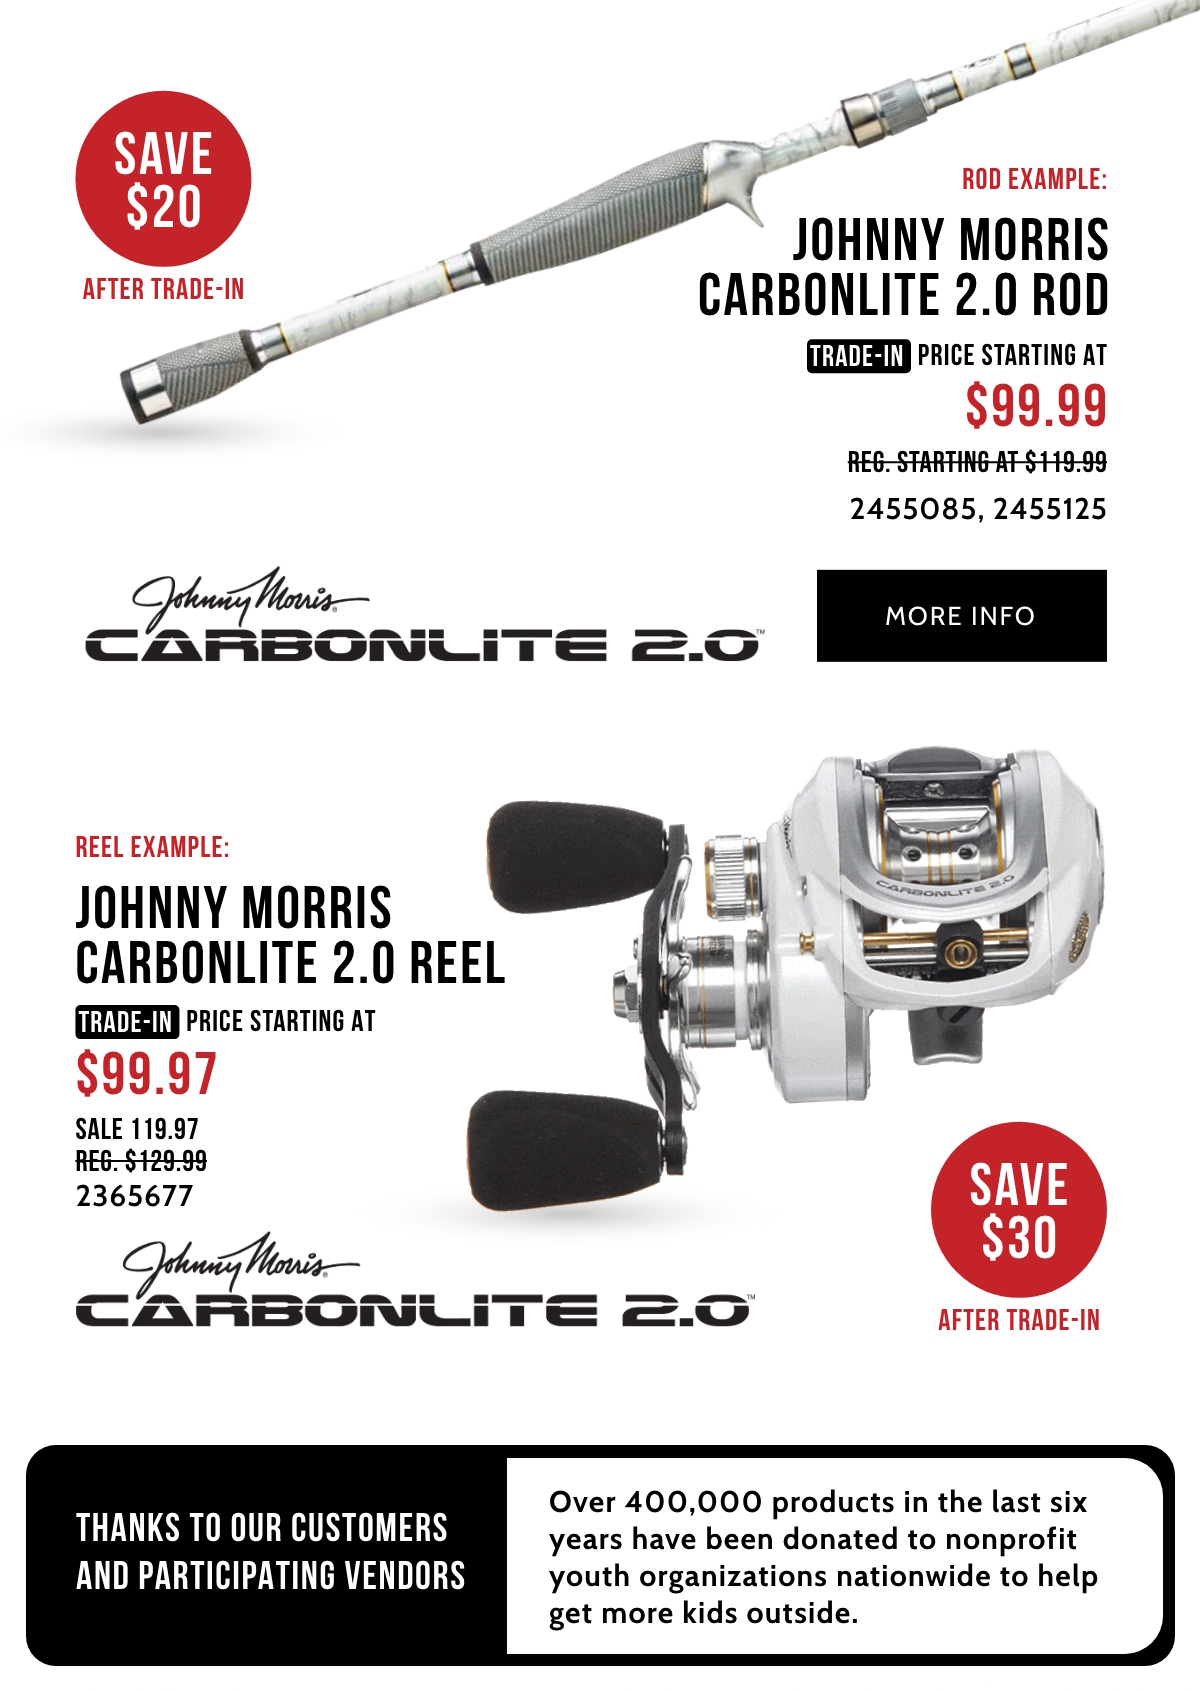 Rod & Reel Trade-In at Your Local Cabela's! - Cabela's